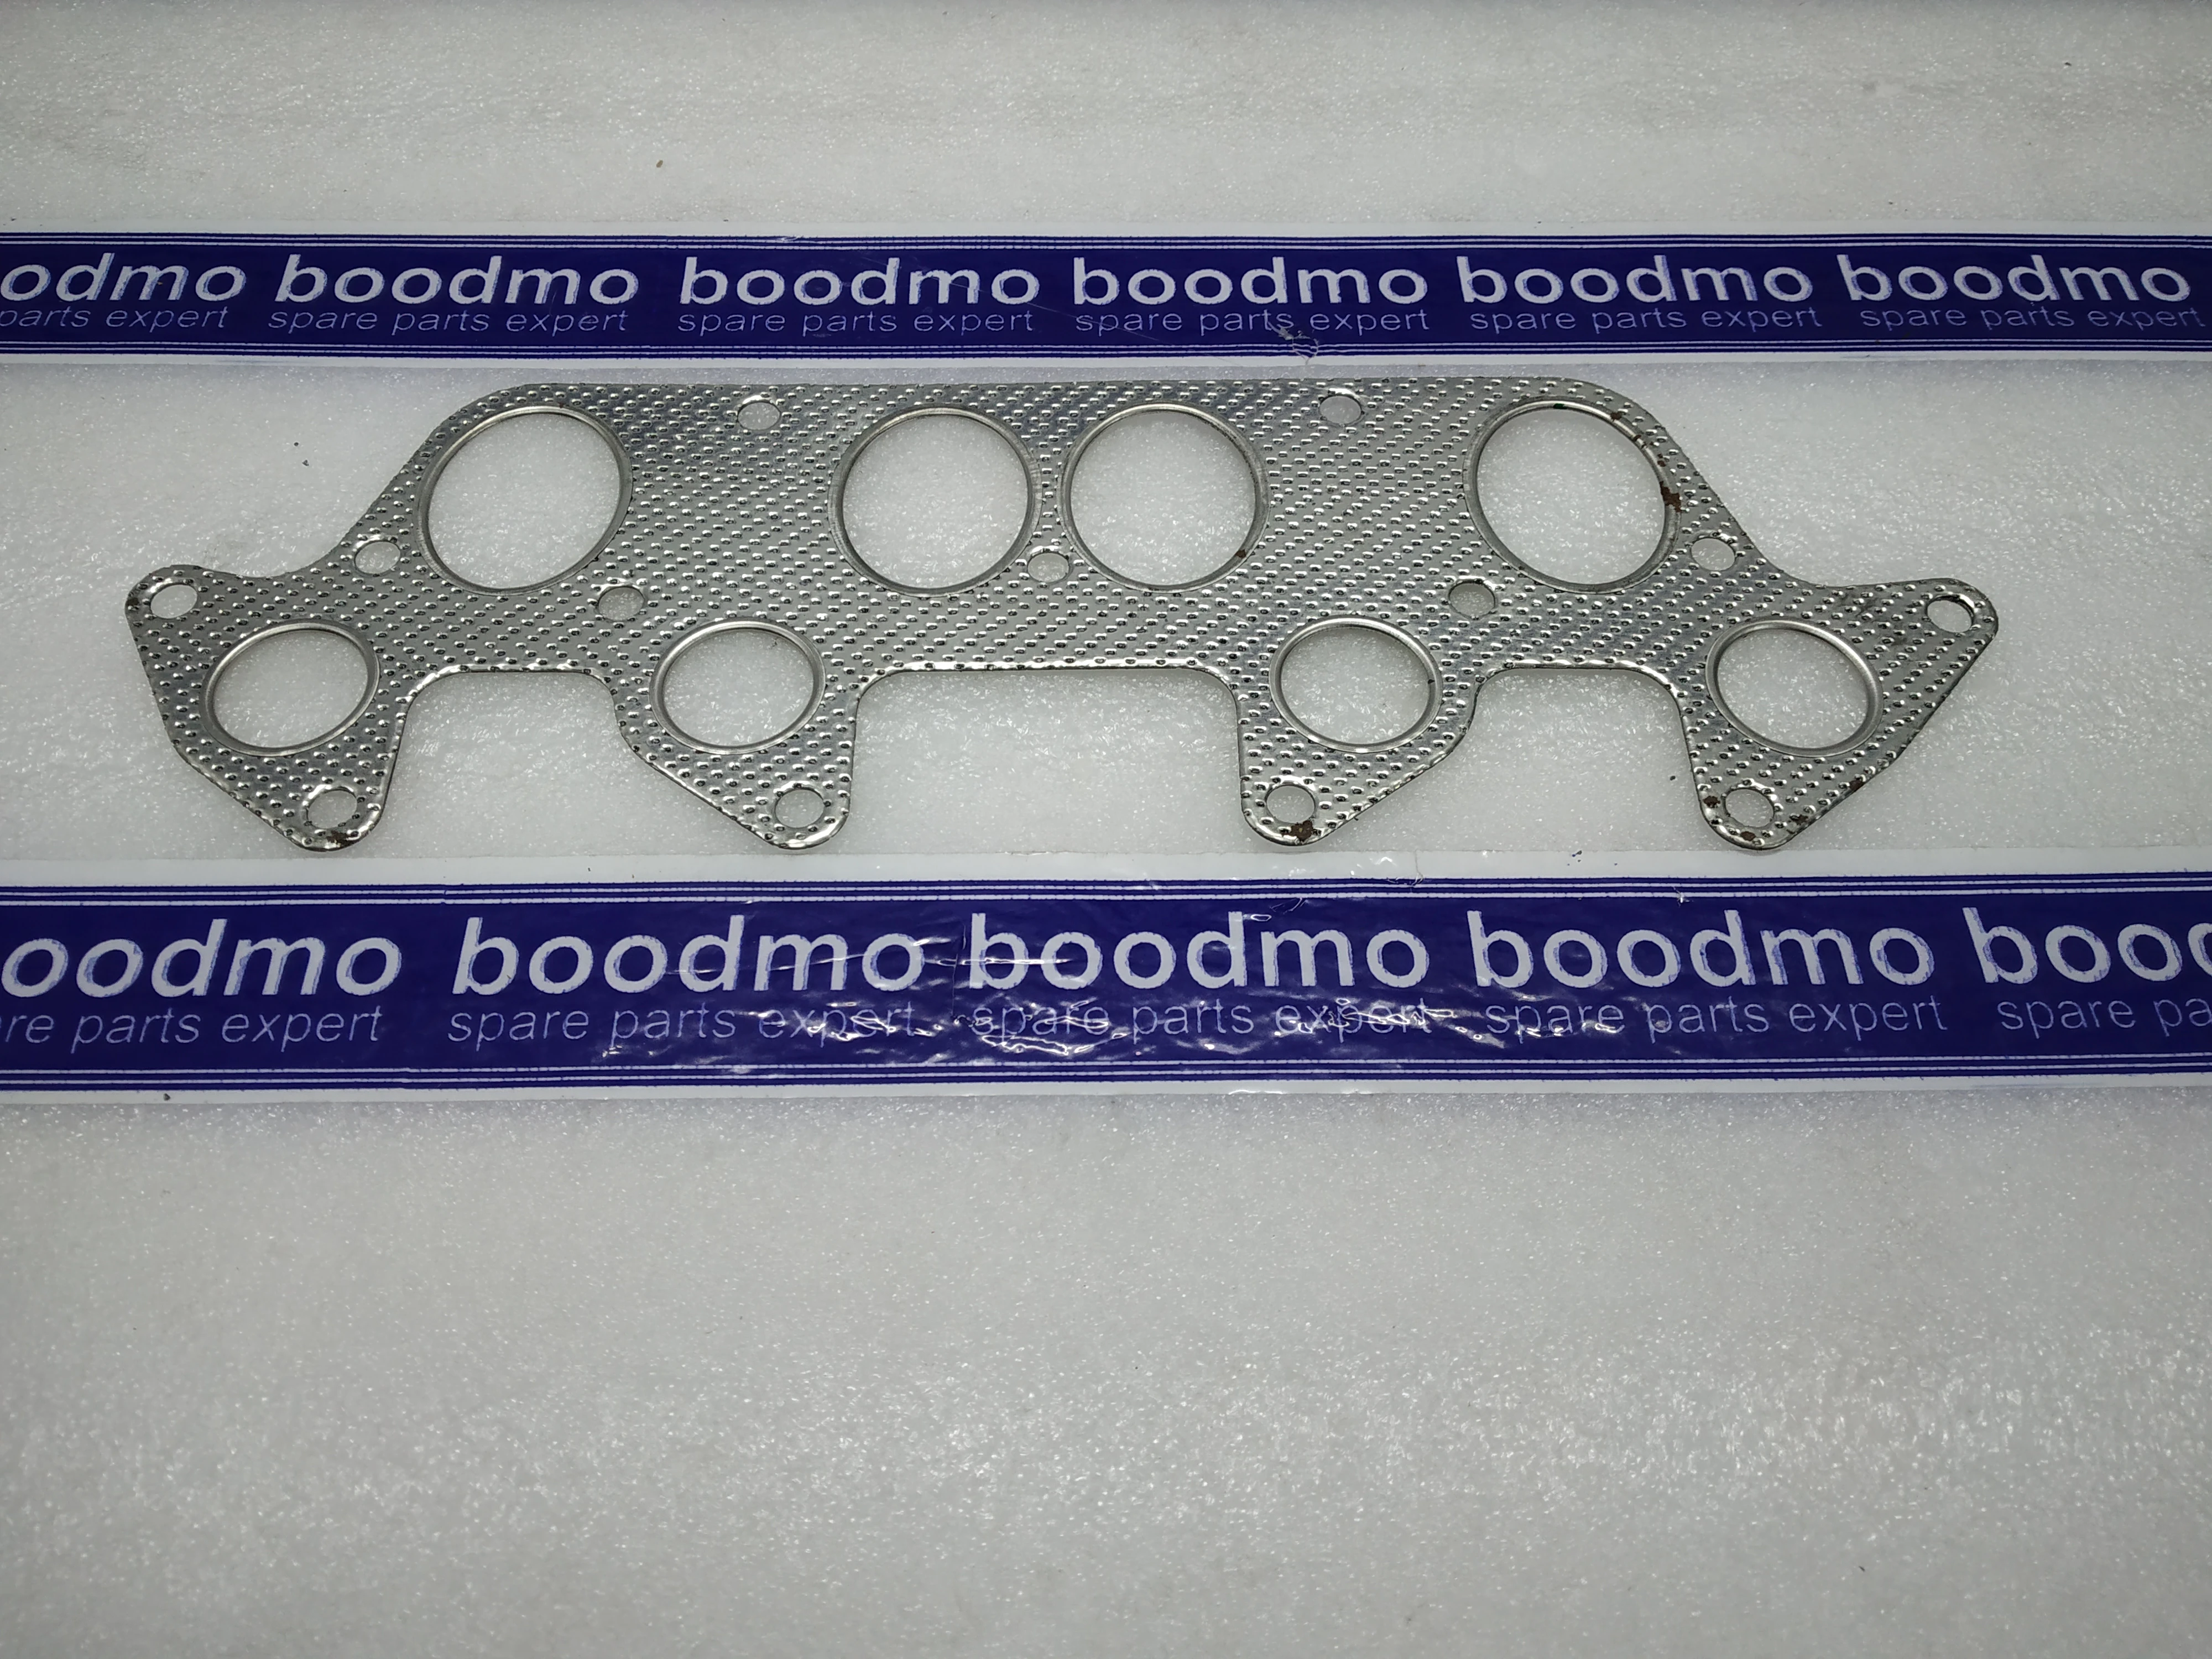 INT.GASKET(INL/EX.MANIFOLD)TCIC: TATA 279015311 -compatibility,  features, prices. boodmo